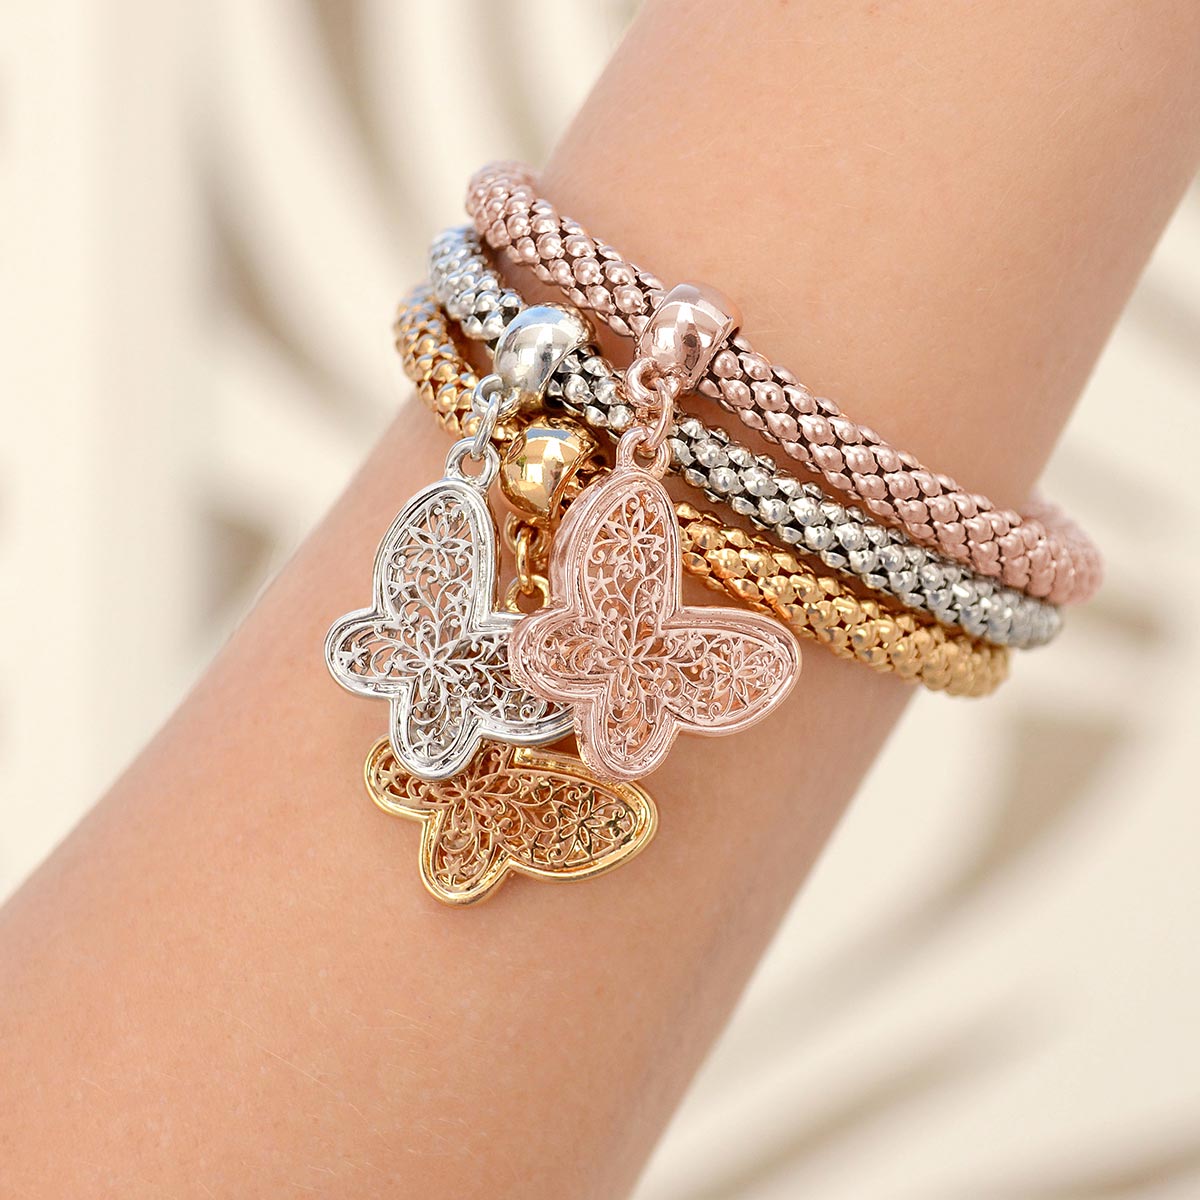 Solid Butterfly Pendant Necklace with FREE Matching Bracelets ($30 Value)